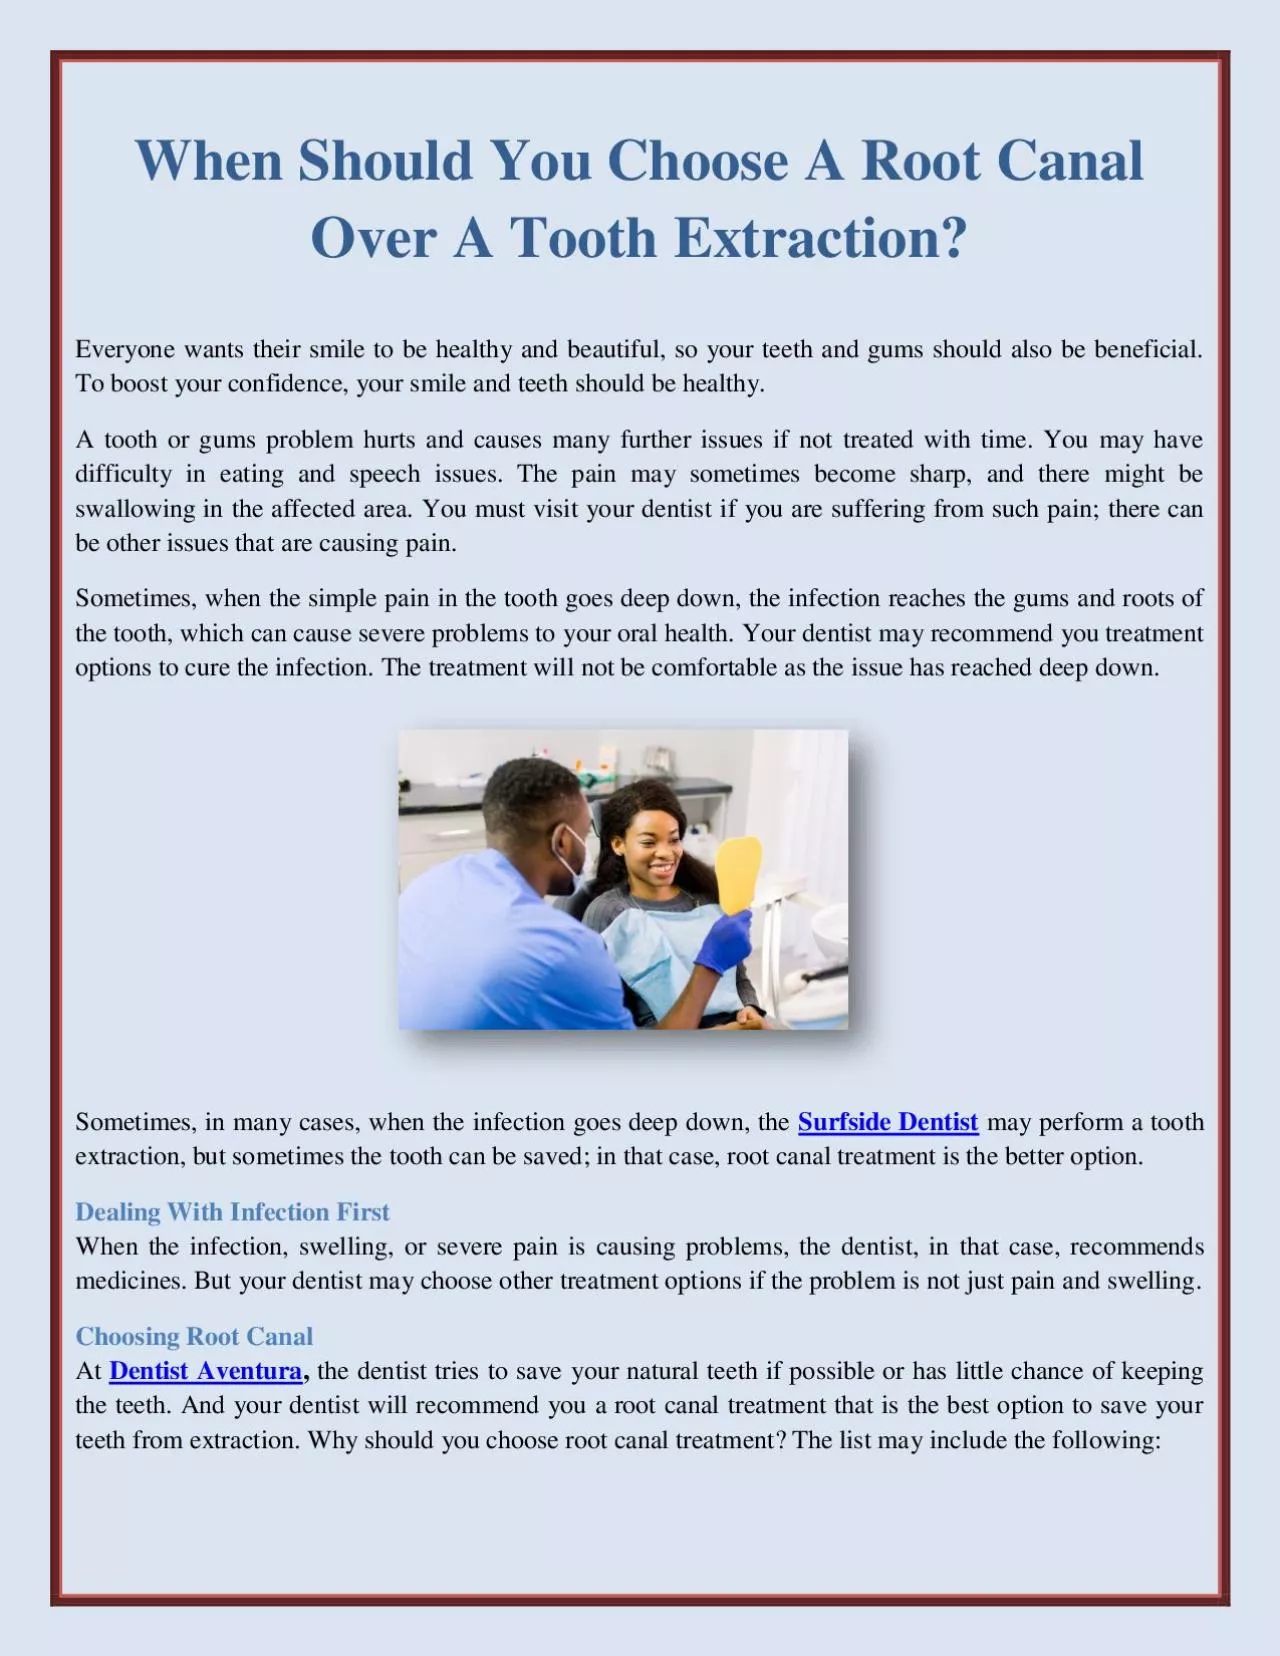 When Should You Choose A Root Canal Over A Tooth Extraction?